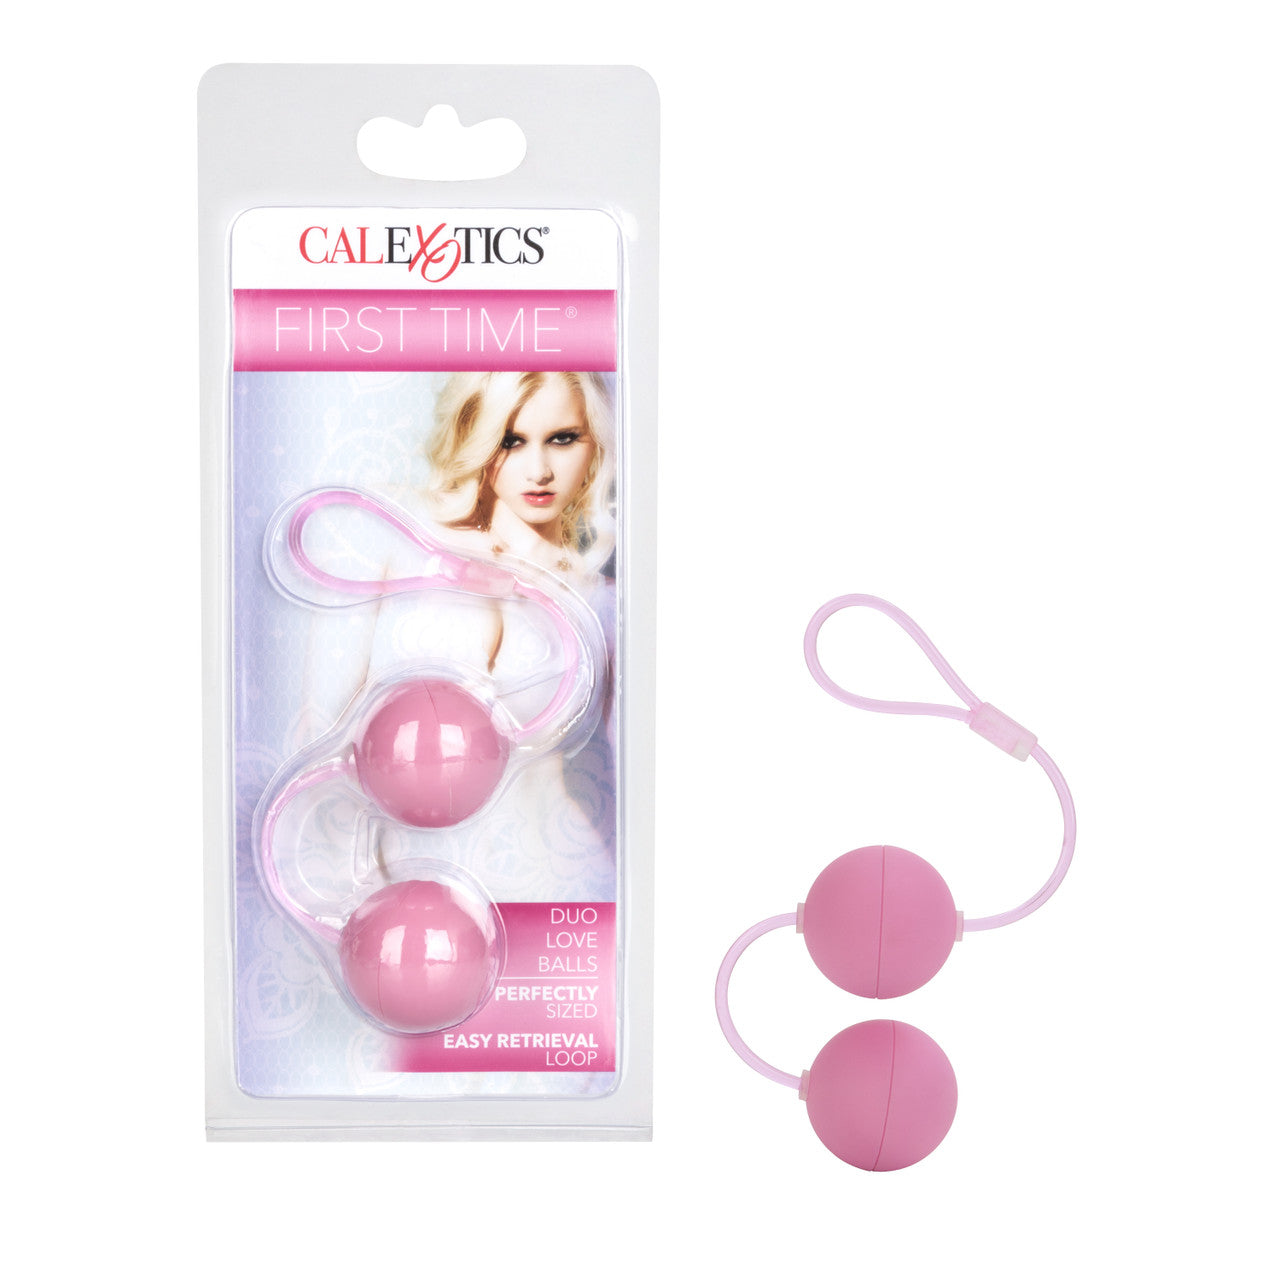 First Time Love Balls Duo Lover - Pink - Thorn & Feather Sex Toy Canada